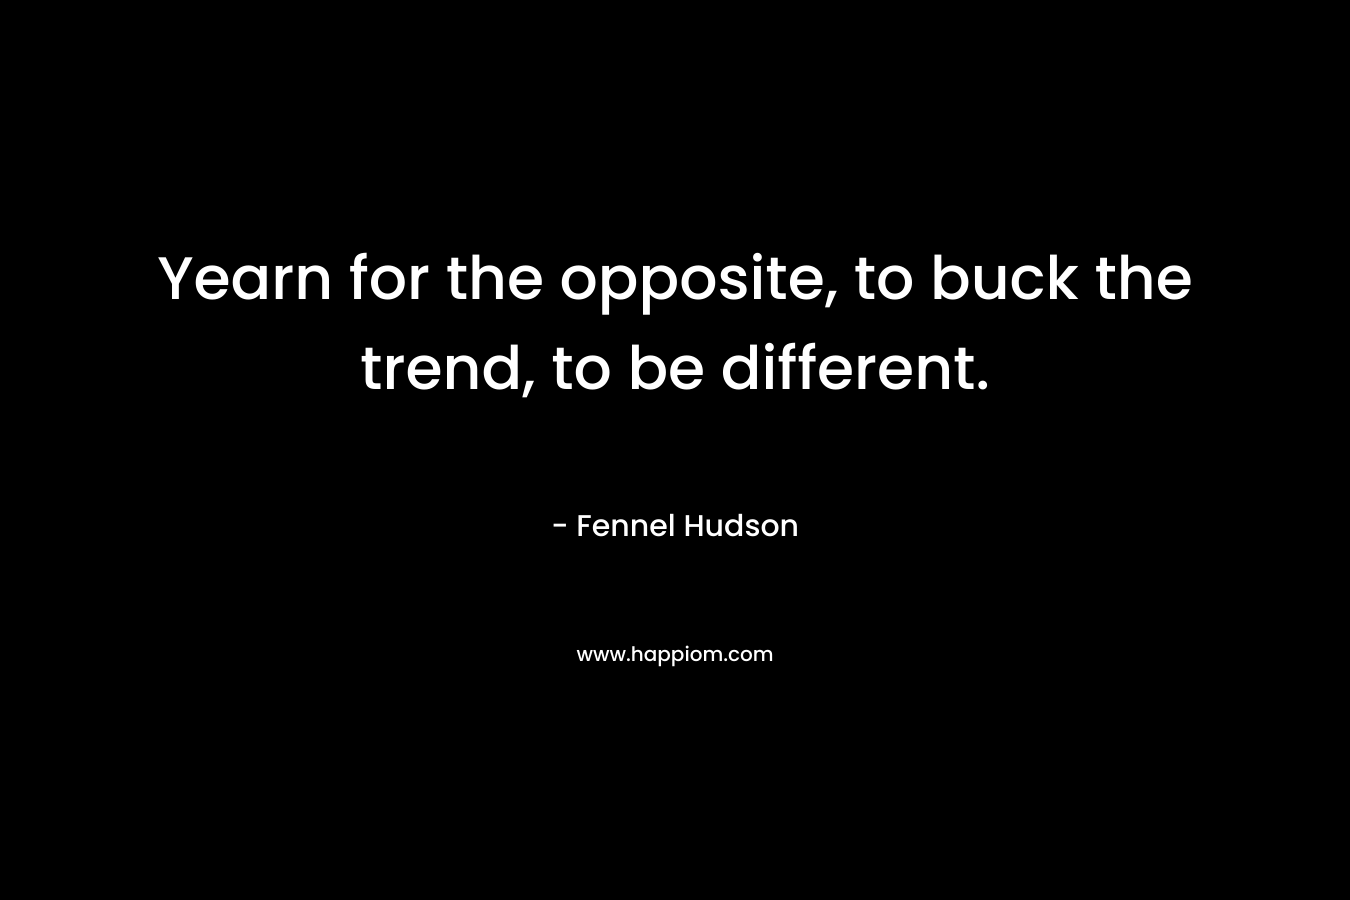 Yearn for the opposite, to buck the trend, to be different.